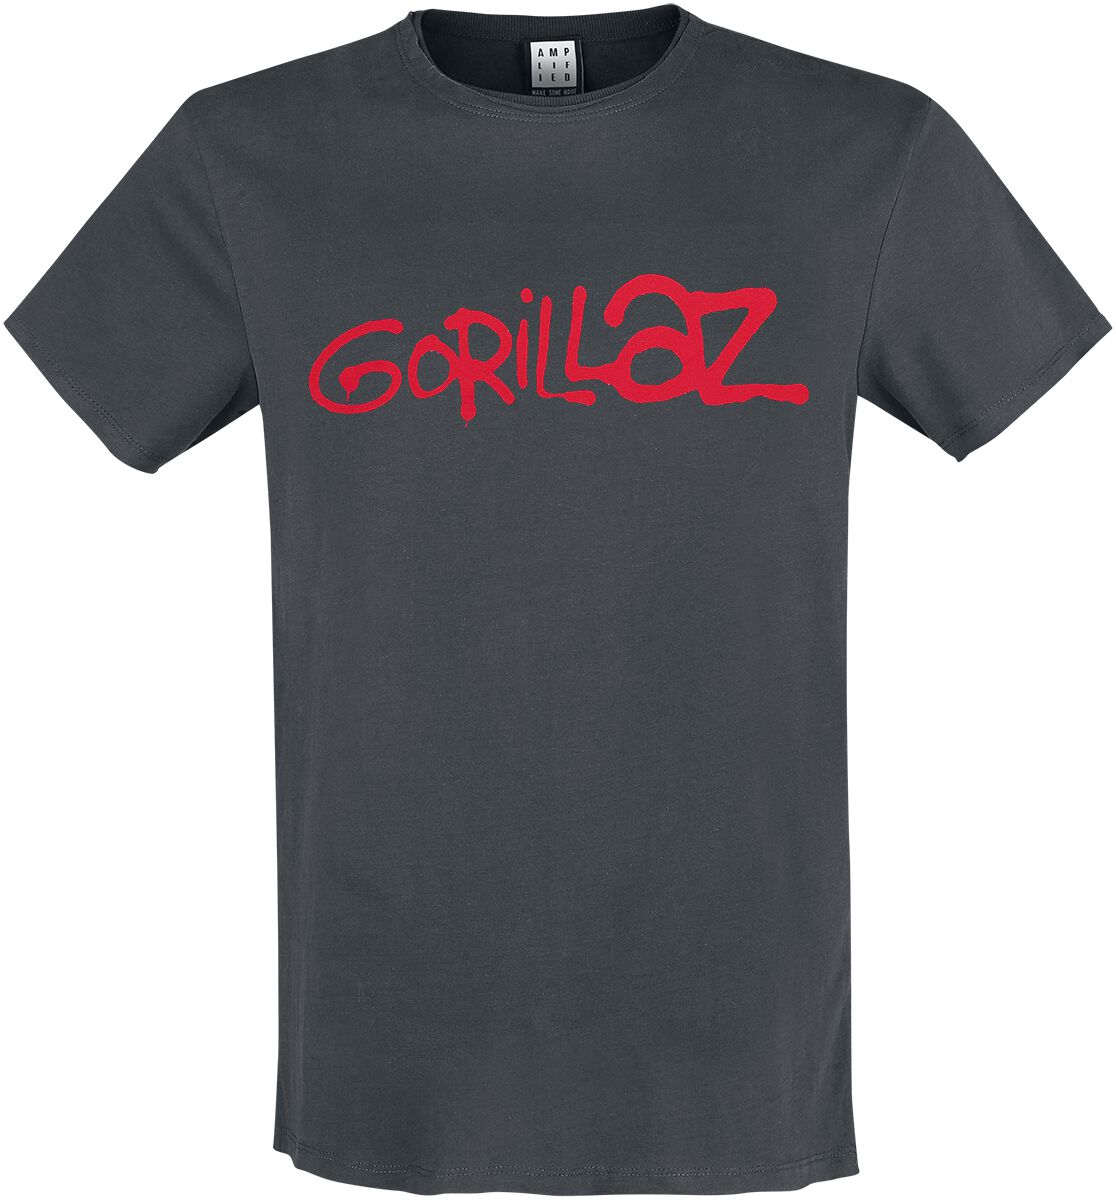 Image of Gorillaz Amplified Collection - Logo T-Shirt charcoal